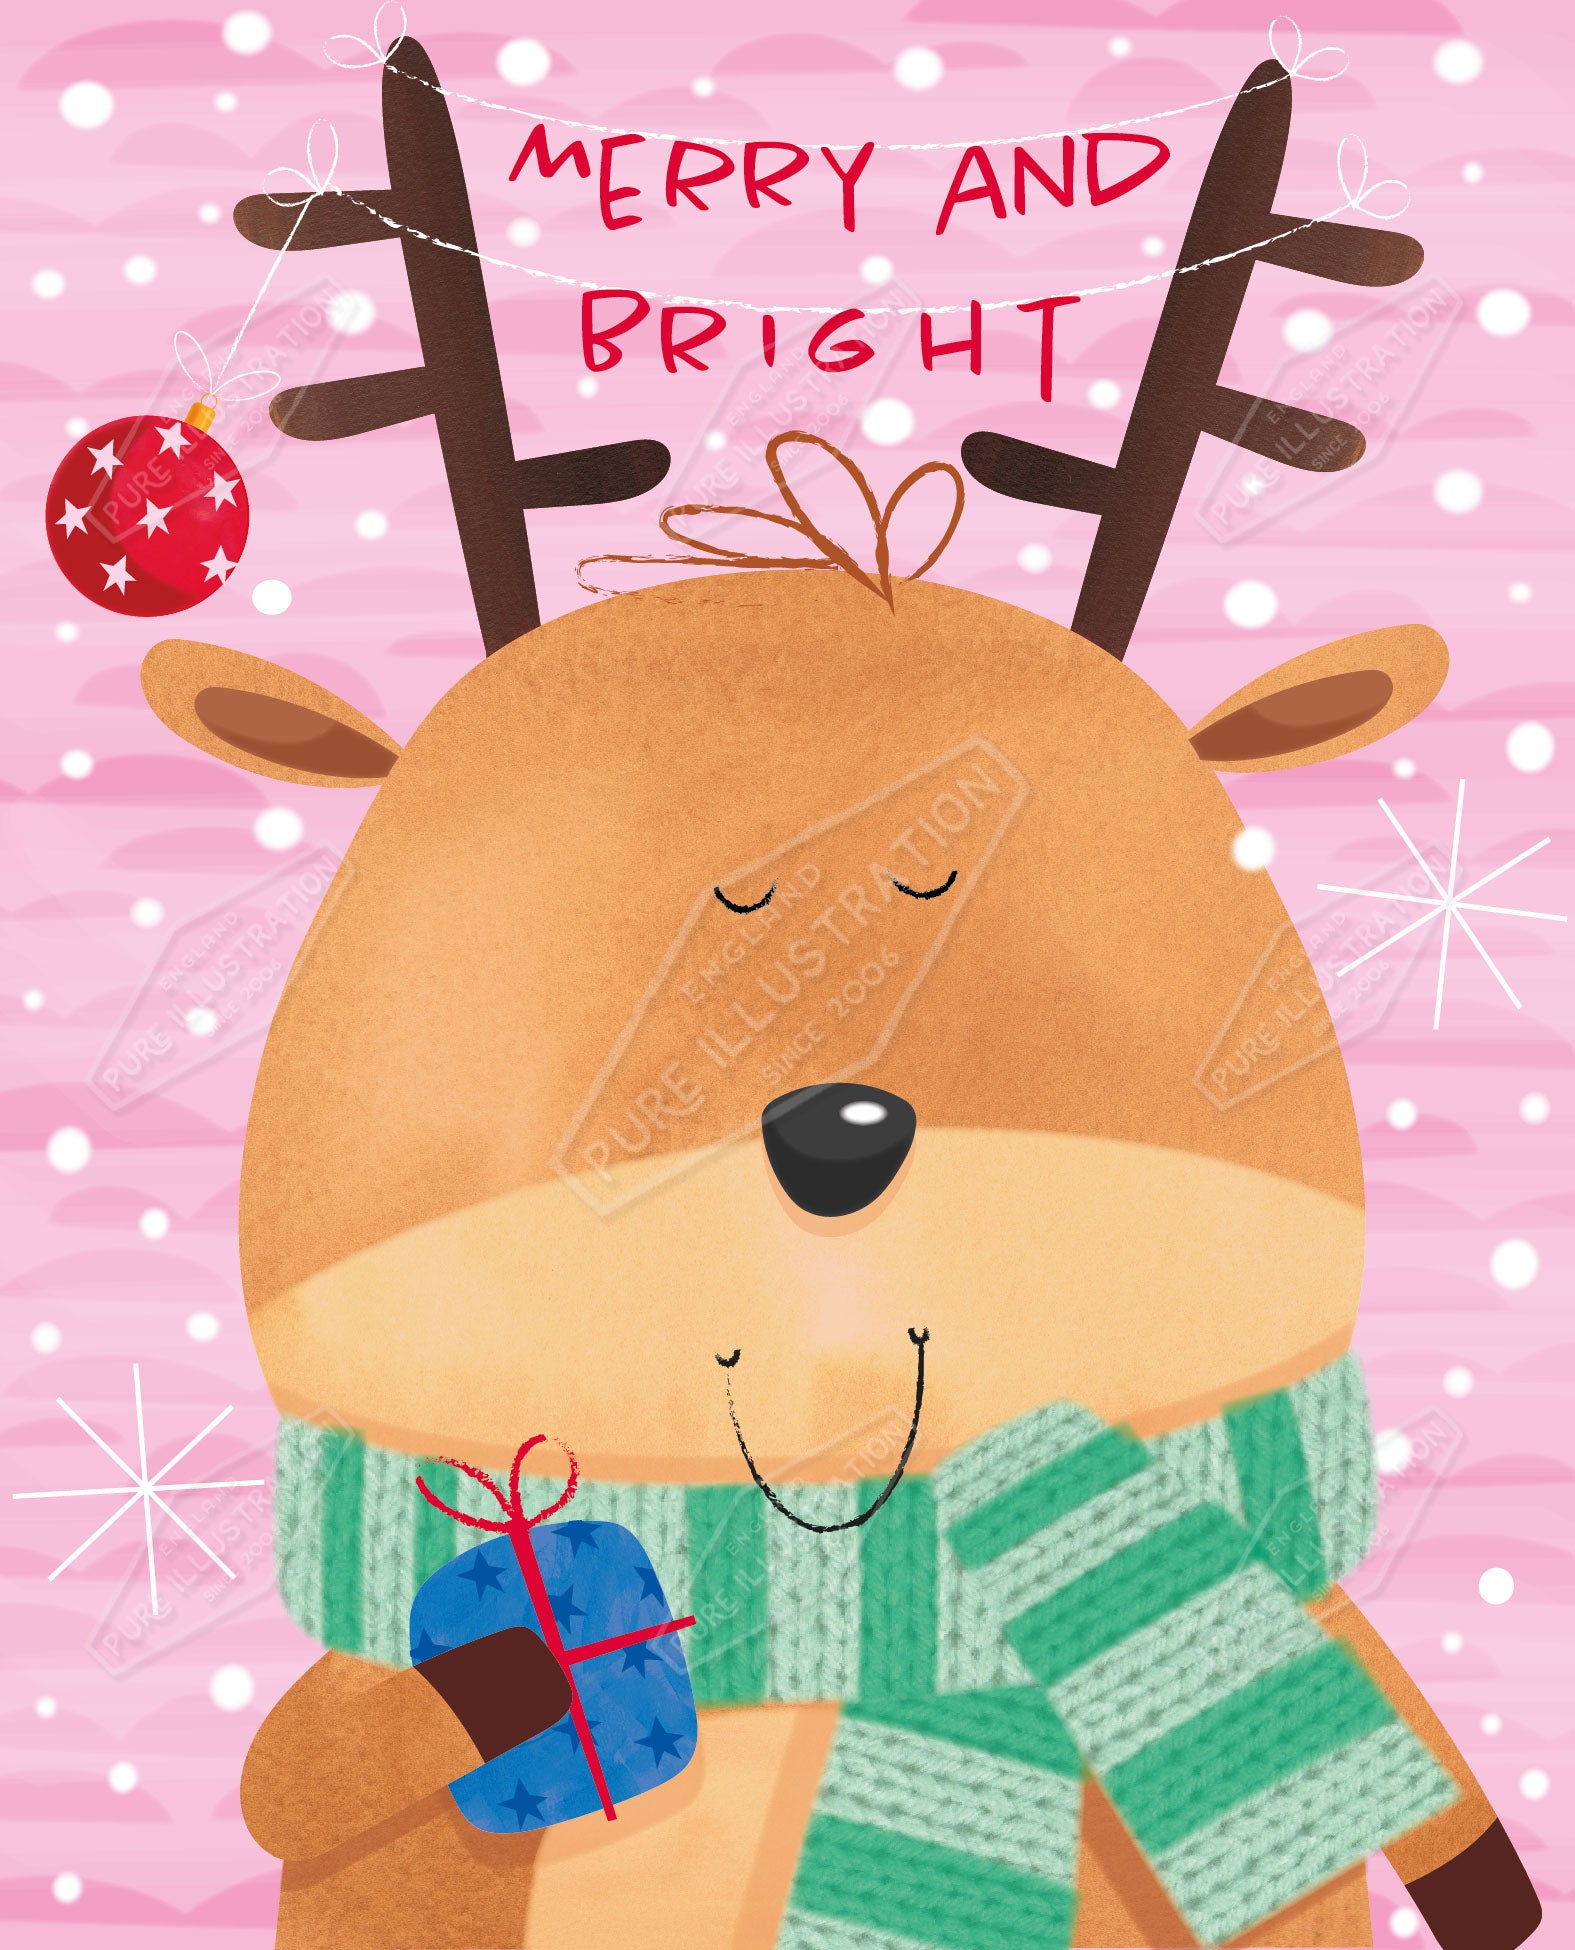 00035485SPI- Sarah Pitt is represented by Pure Art Licensing Agency - Christmas Greeting Card Design